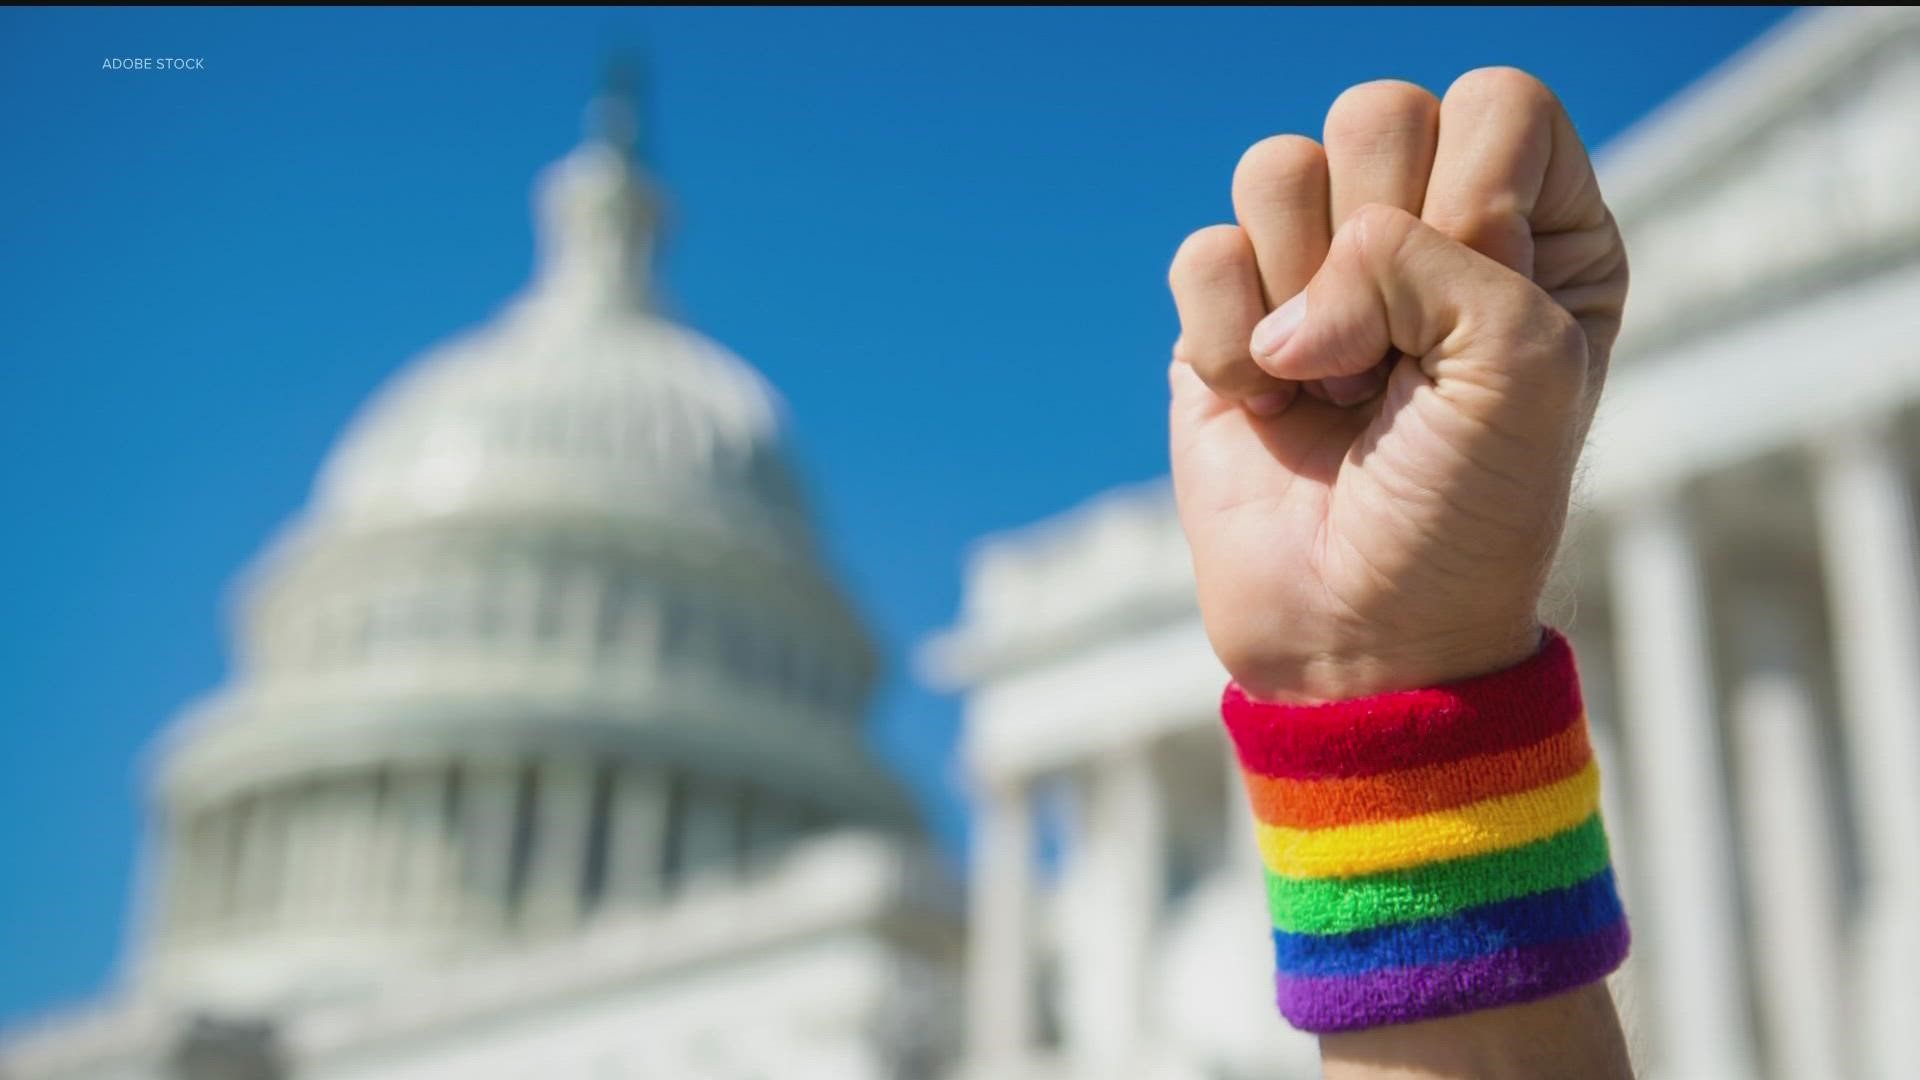 The number of LGBTQ people holding office has jumped in recent years.